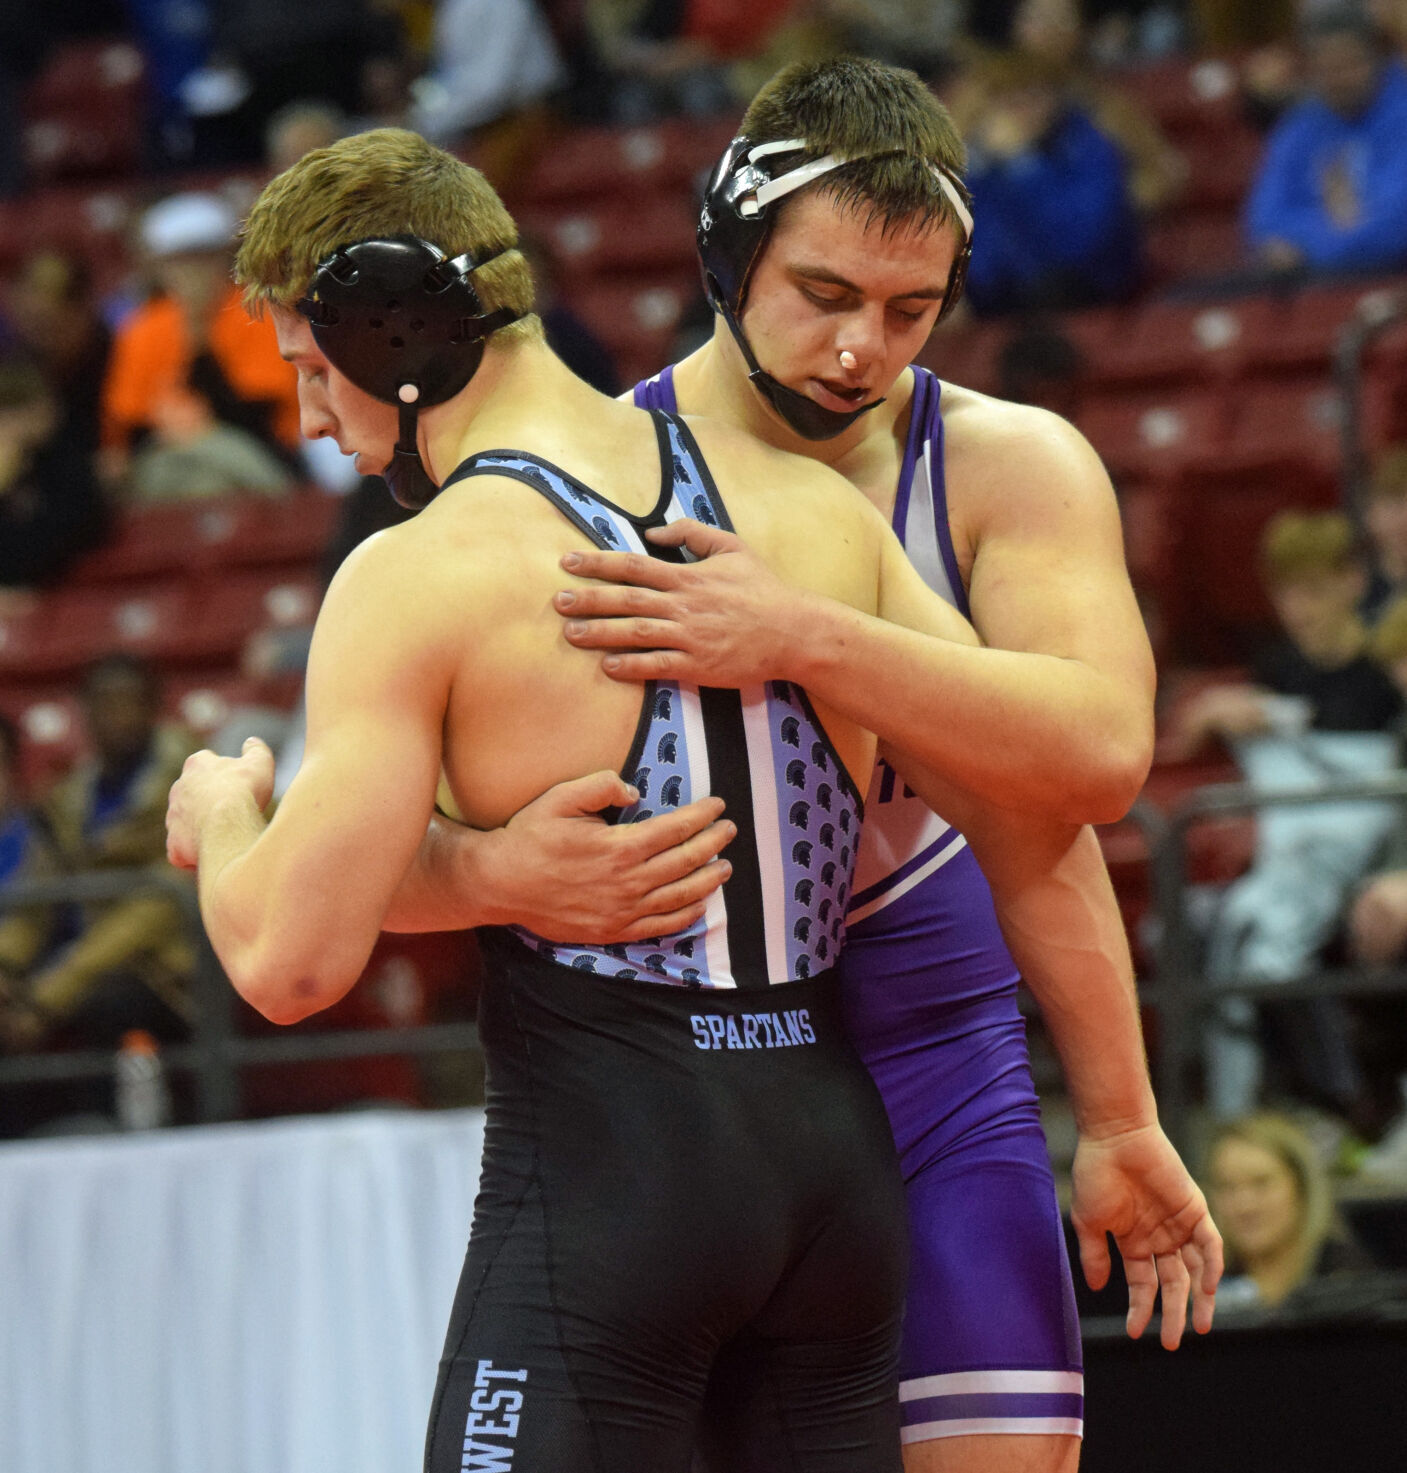 Reigning state champs pace too quick for Stoughton senior with 73-pound advantage pic